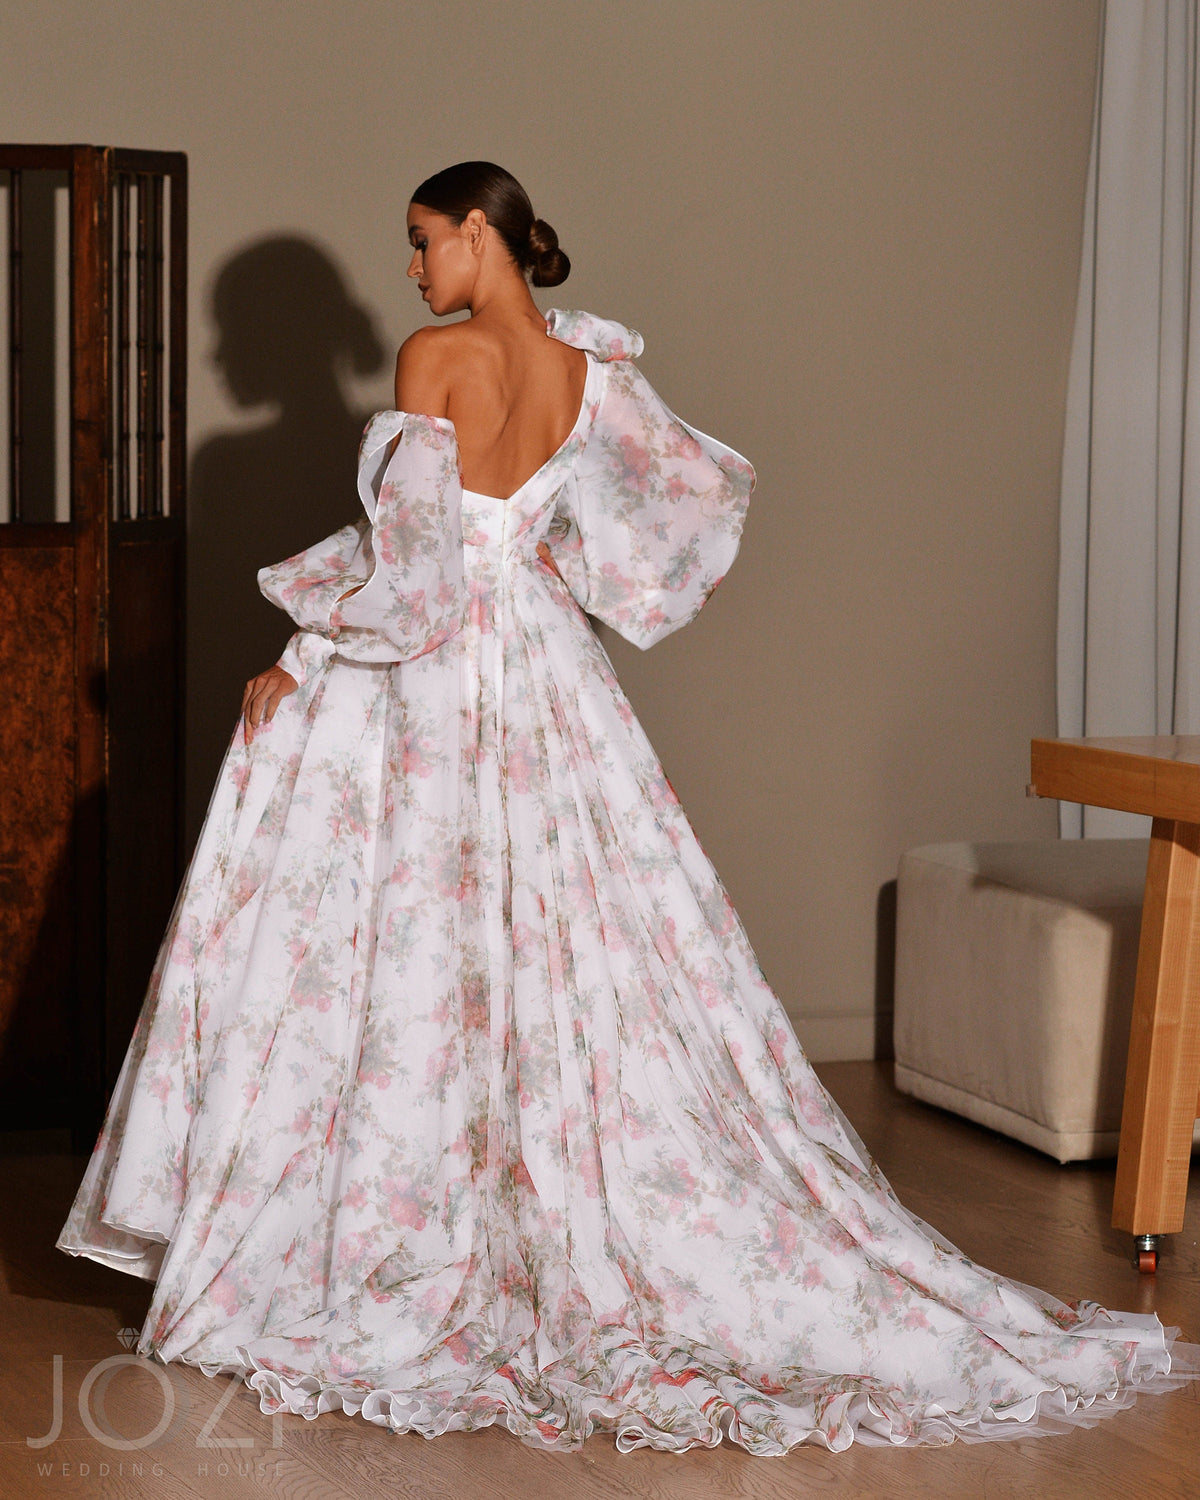 Floral Print ALine Asymmetrical Off The Shoulder Long Sleeve Open Back Wedding Dress Bridal Gown Side Thigh Slit with Train Unique